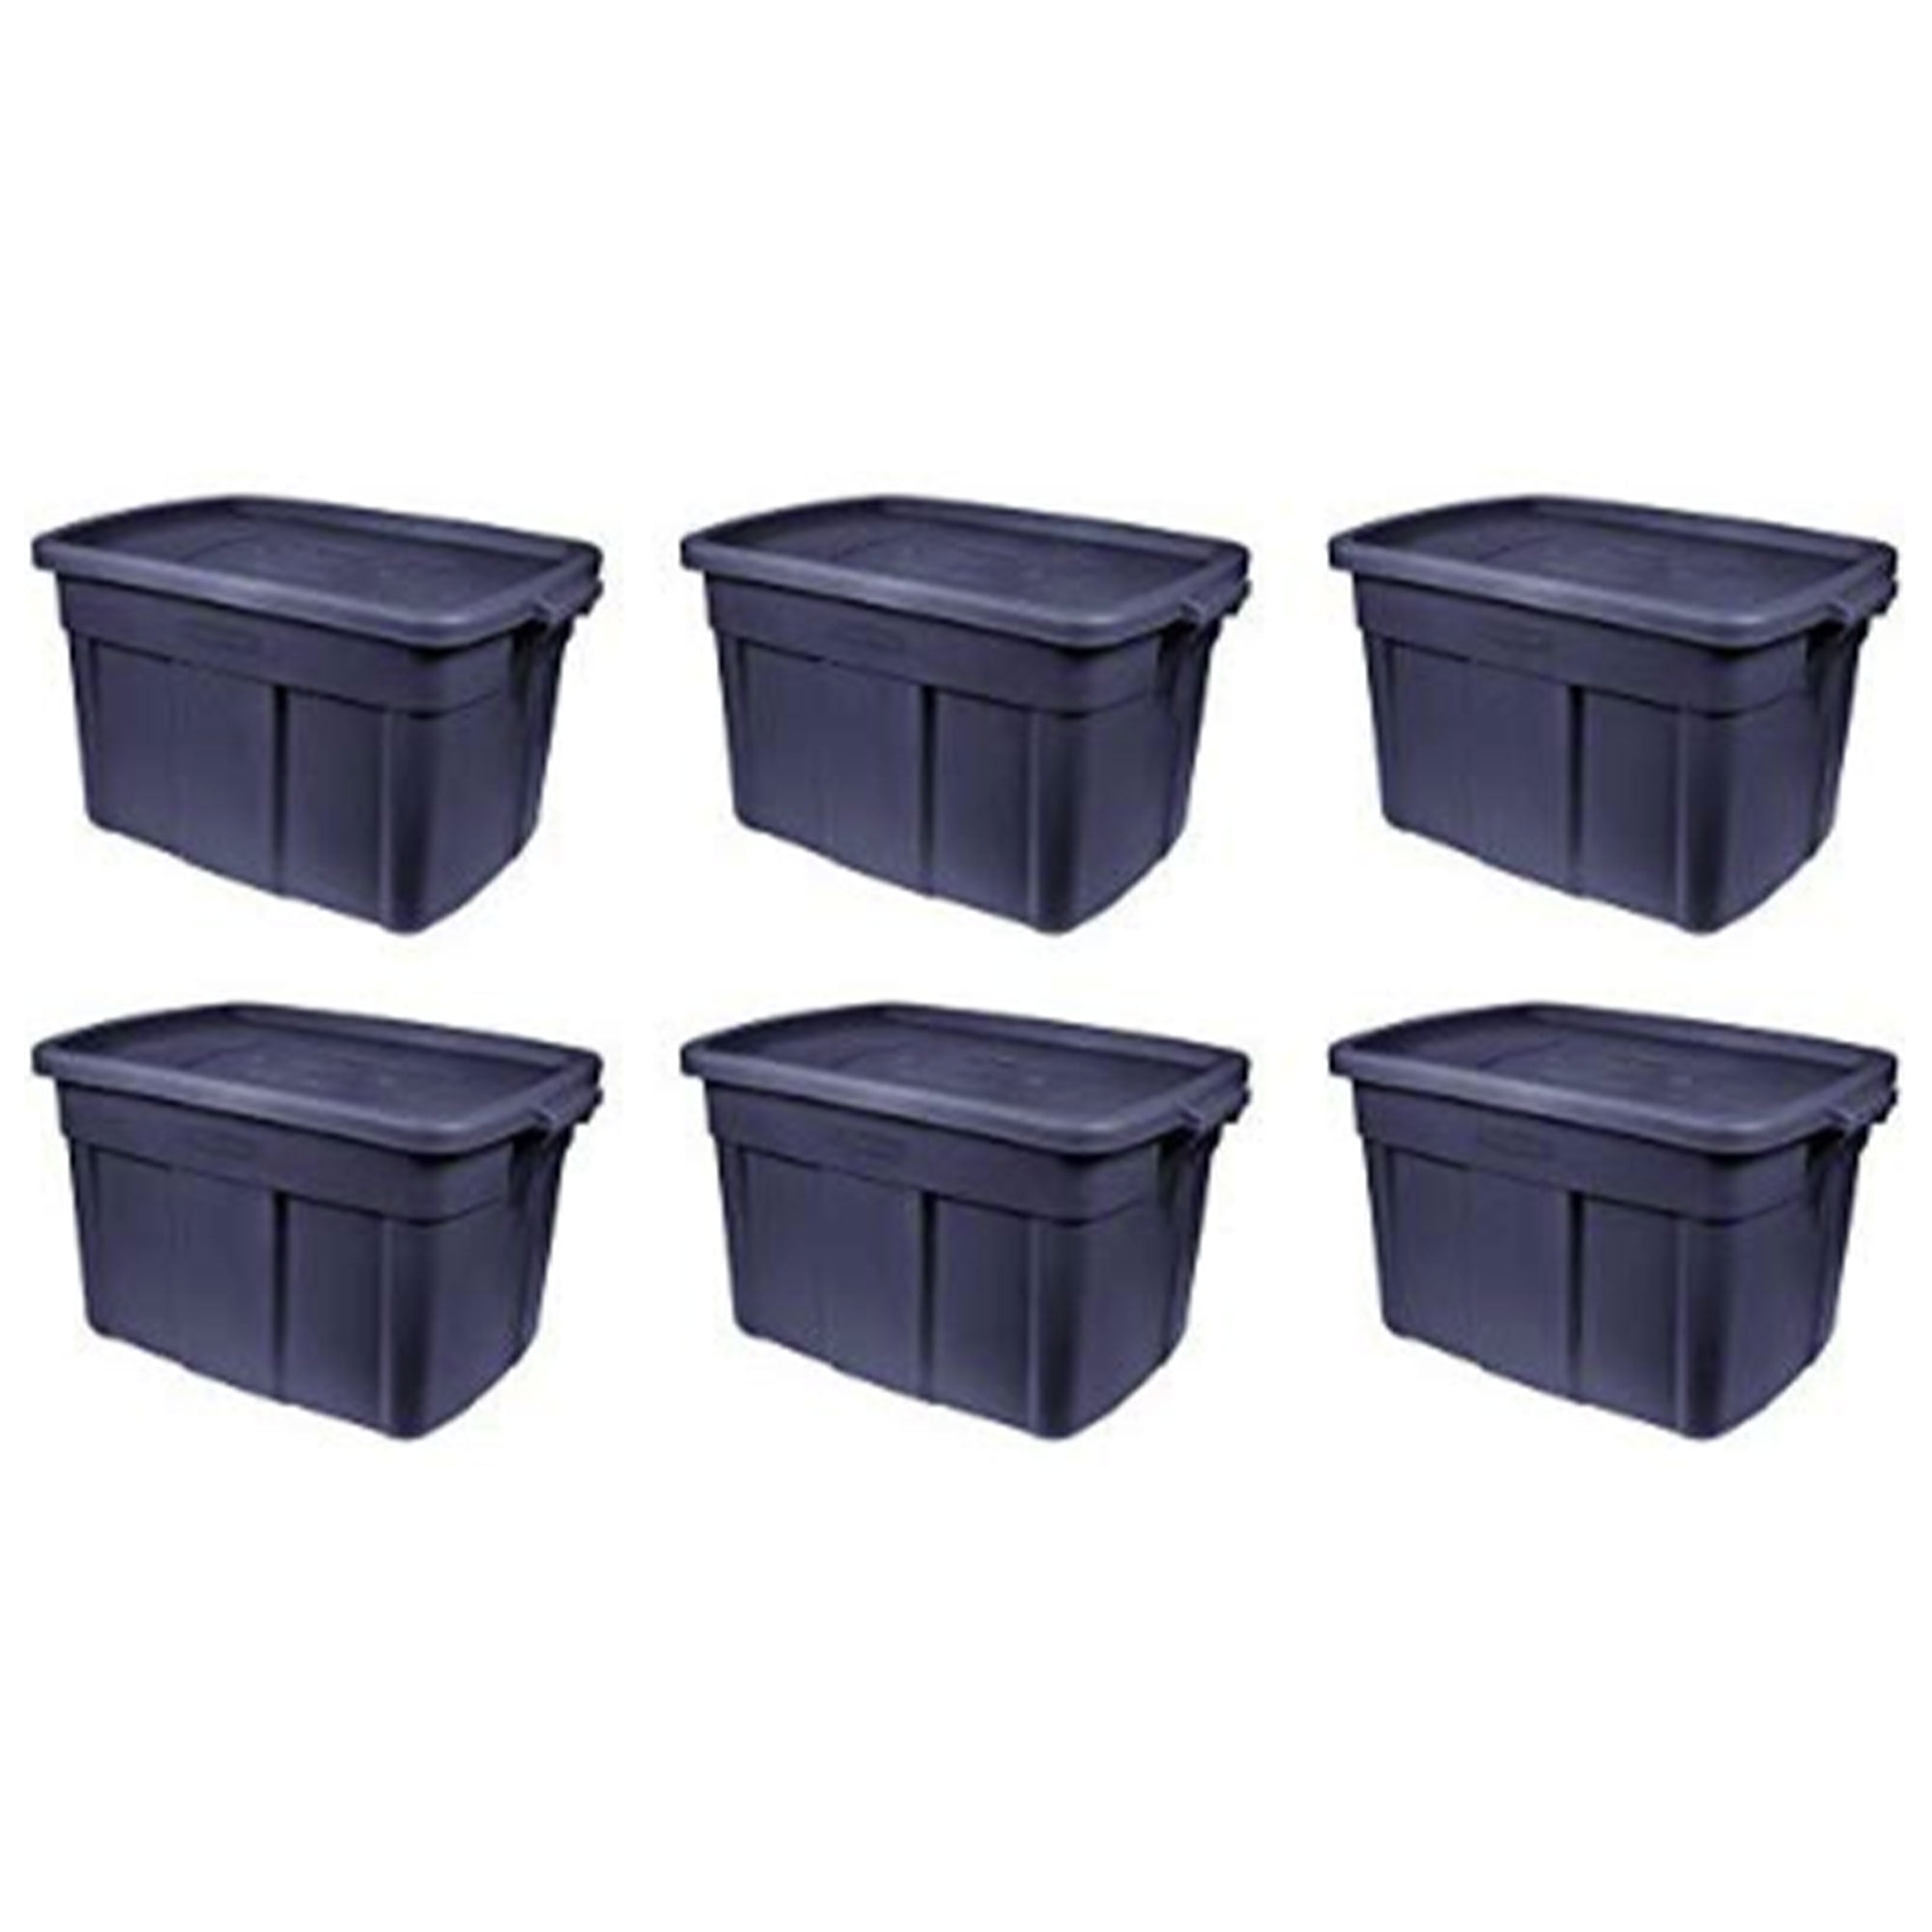 7 Rubbermaid Roughneck 18 gallon totes and lids. - Northern